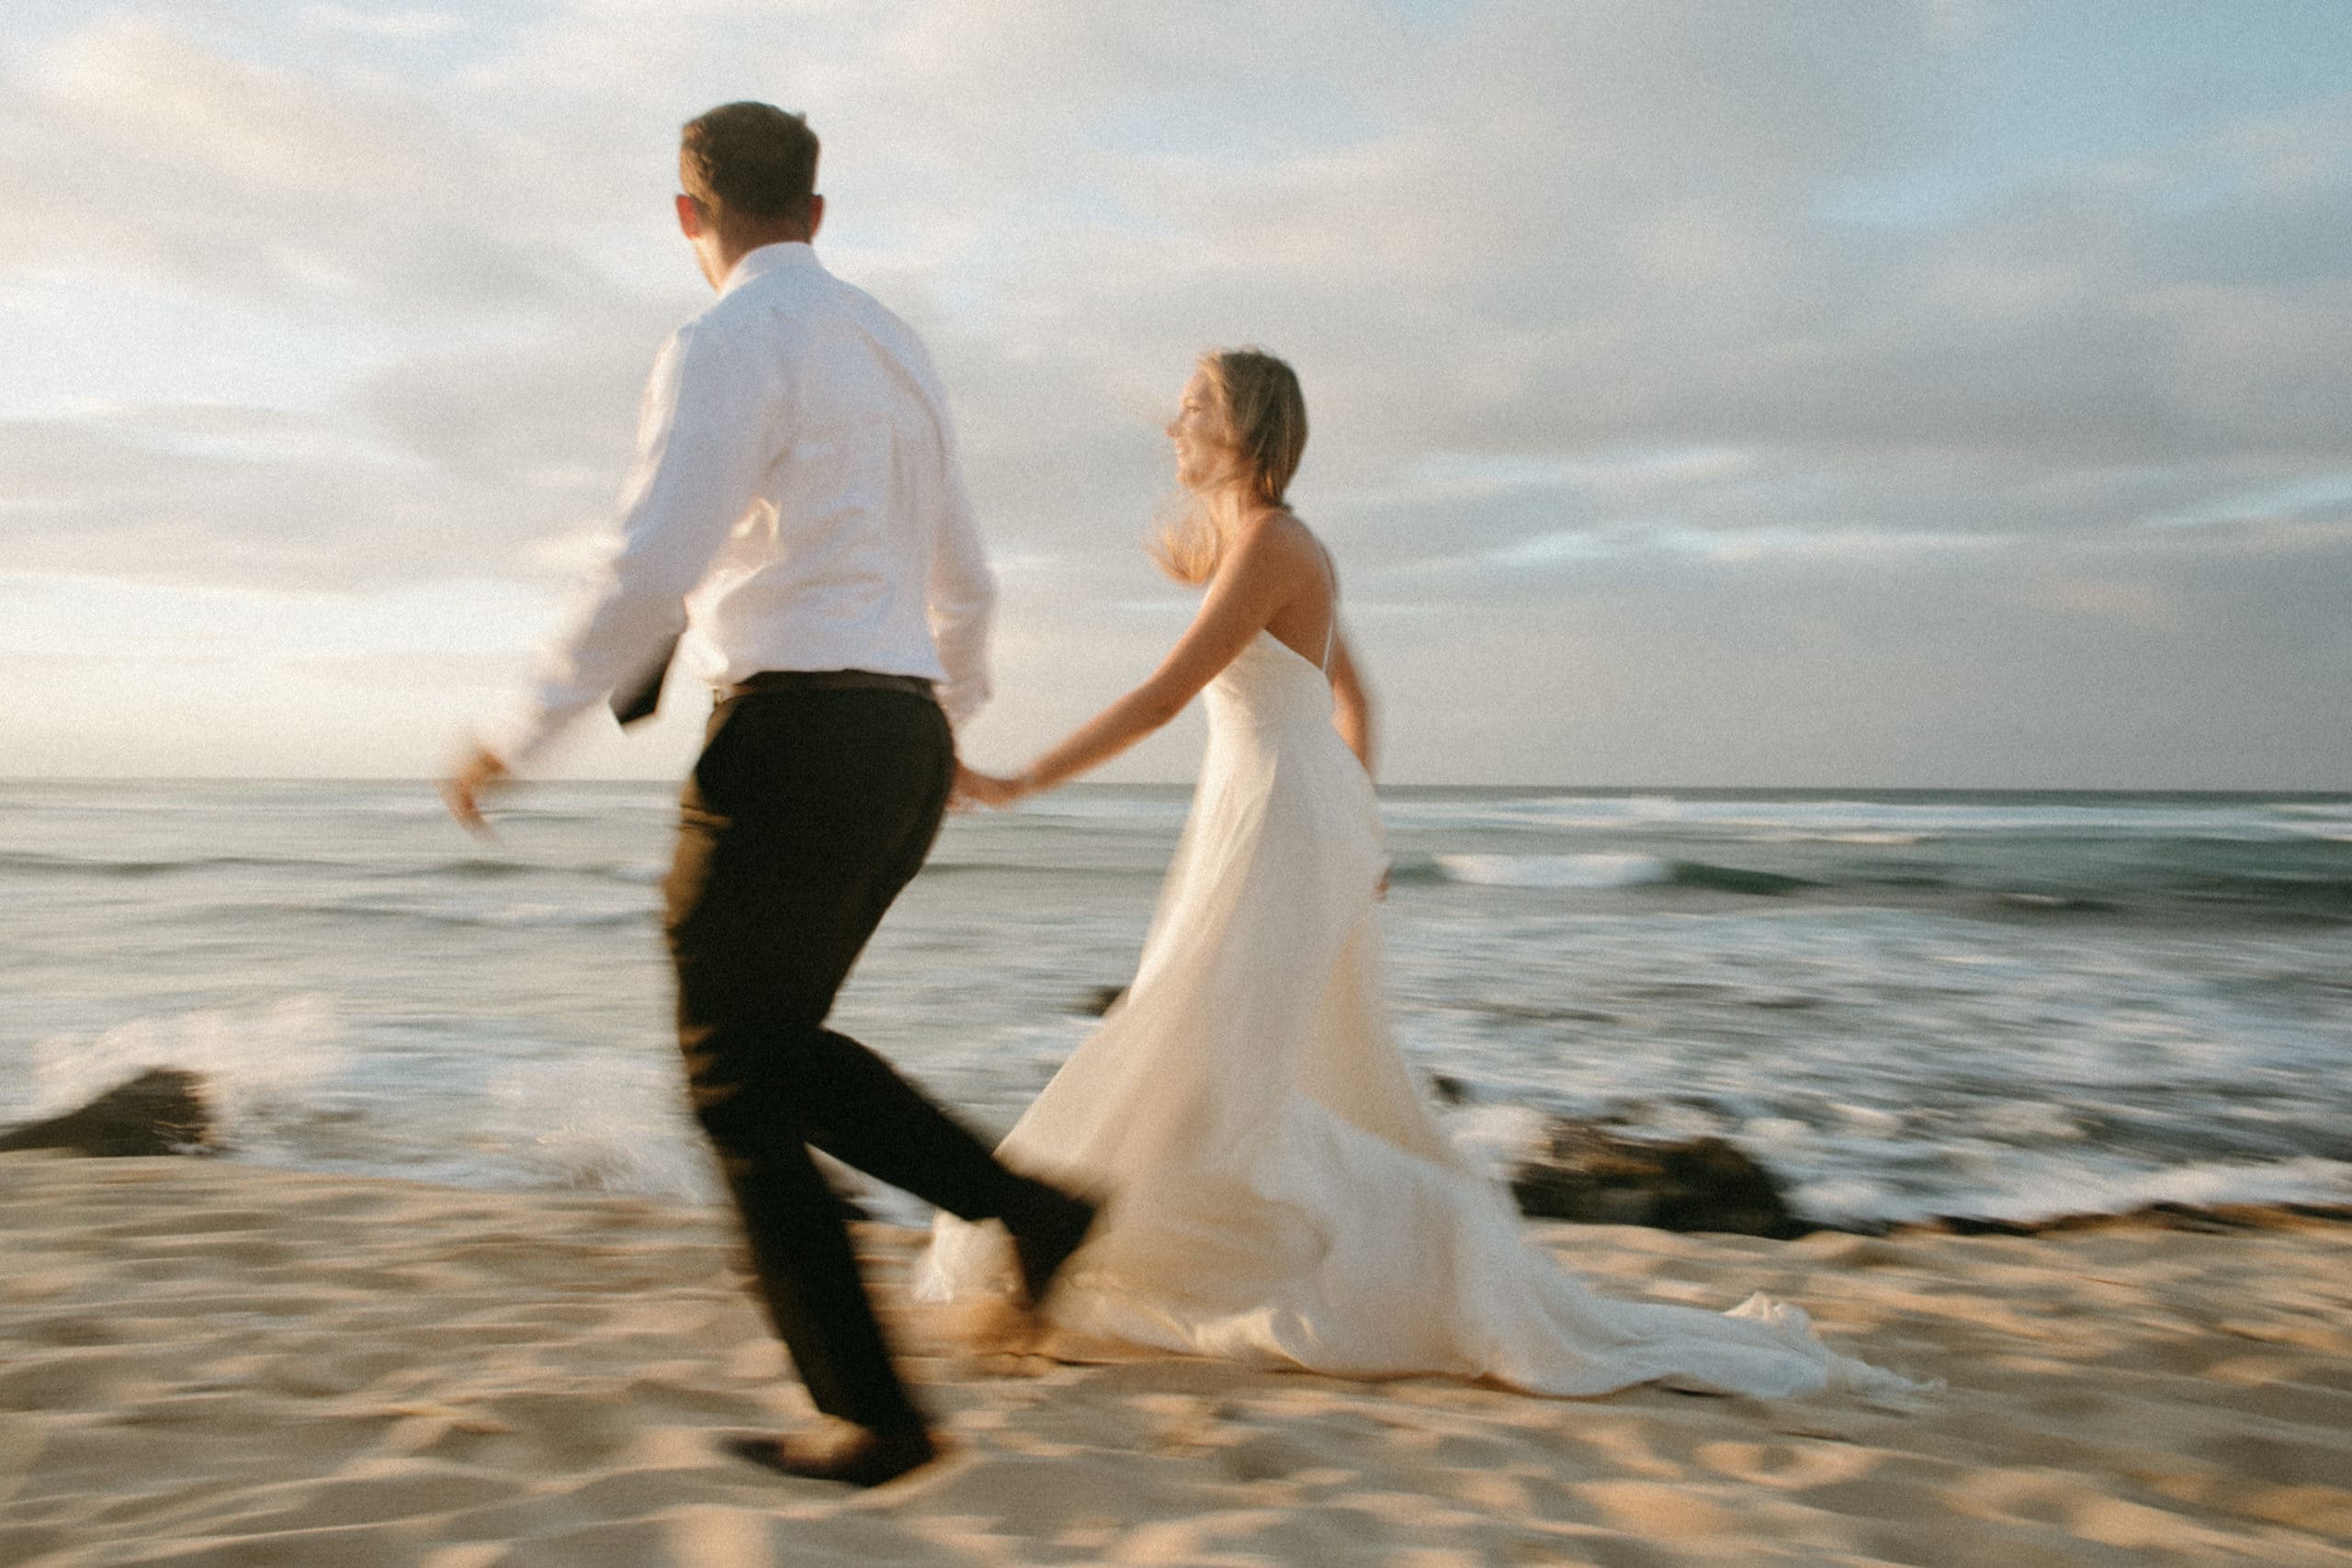 North and East Shore Oahu elopement and wedding venues